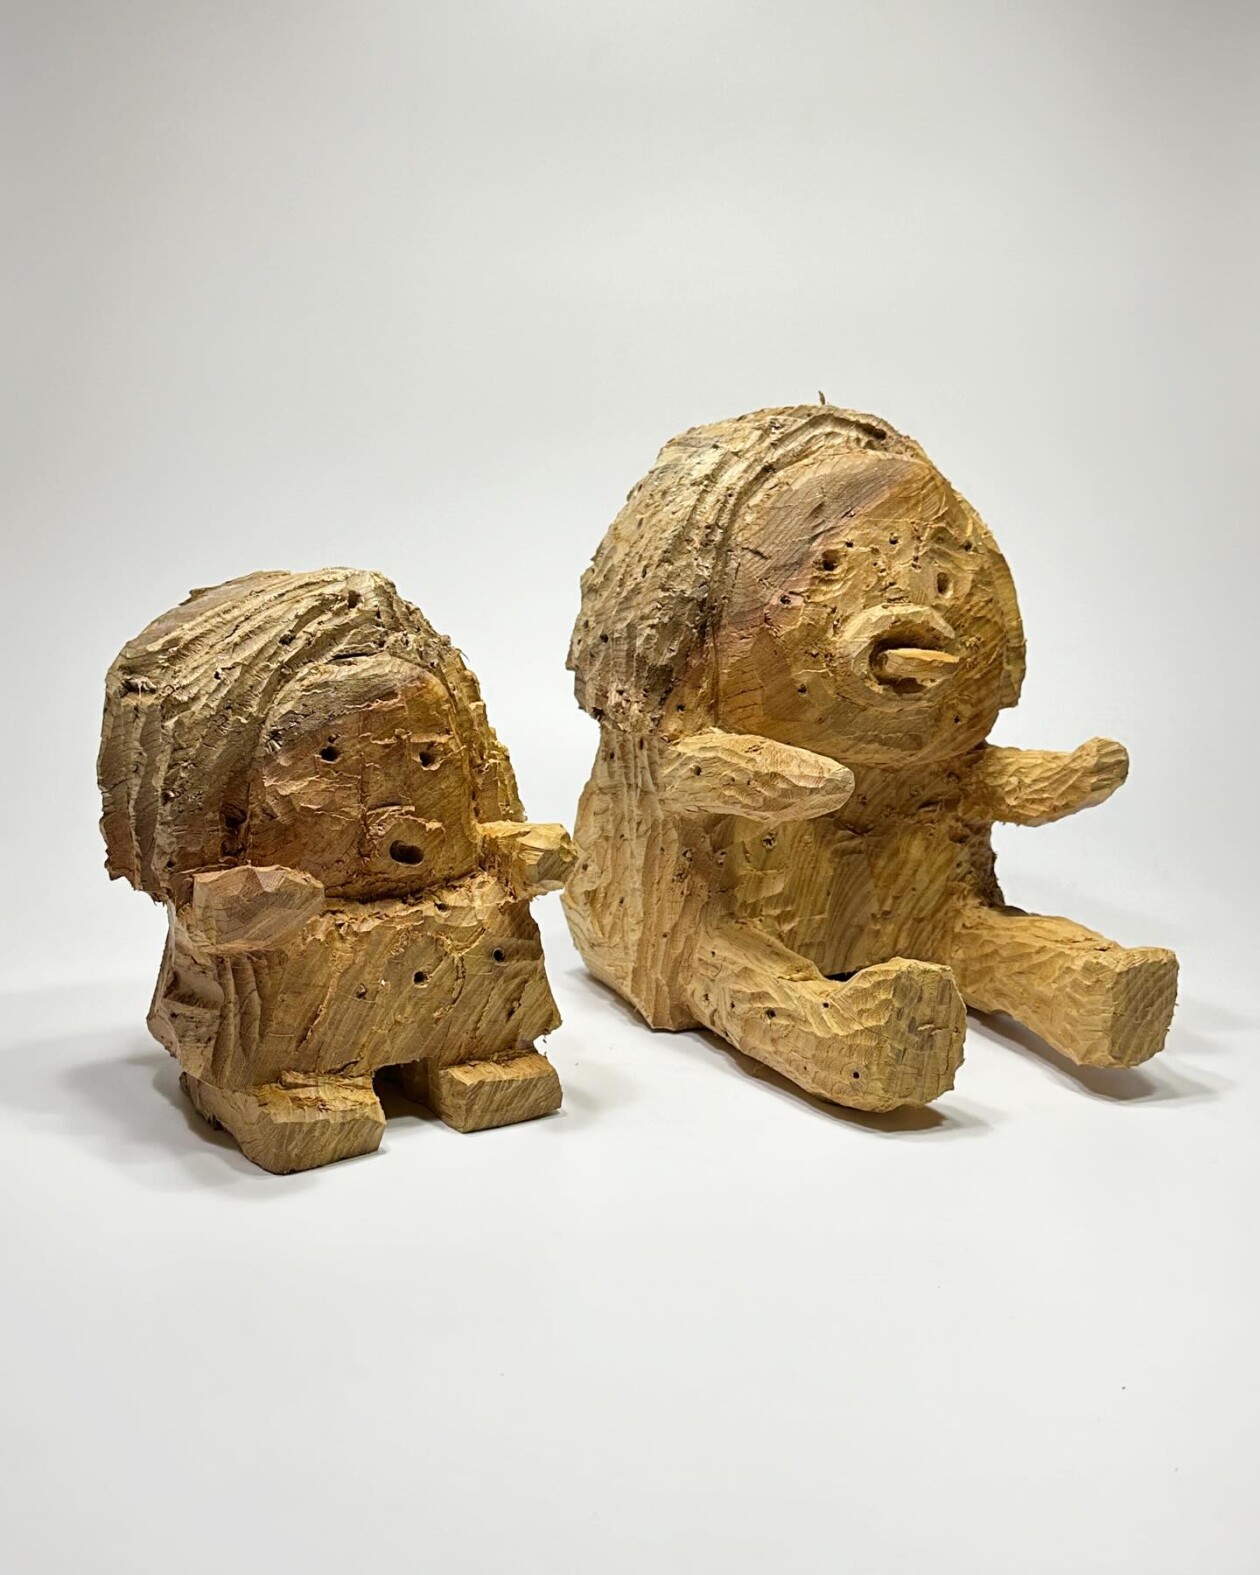 The Enchanting World Of Hirosuke Yabe's Wooden Beings (4)